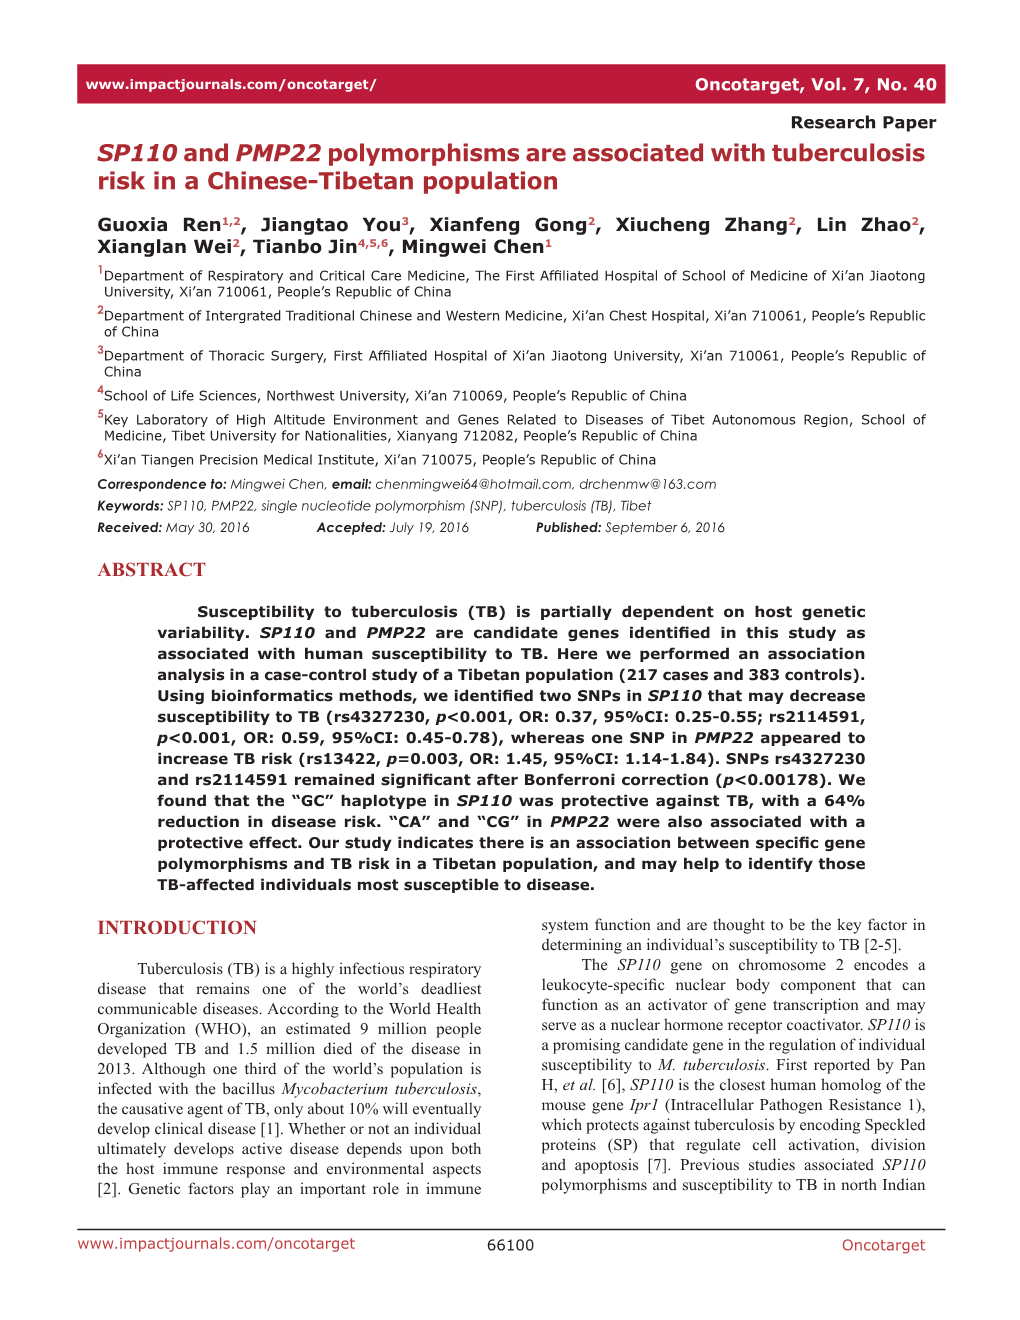 SP110 and PMP22 Polymorphisms Are Associated with Tuberculosis Risk in a Chinese-Tibetan Population